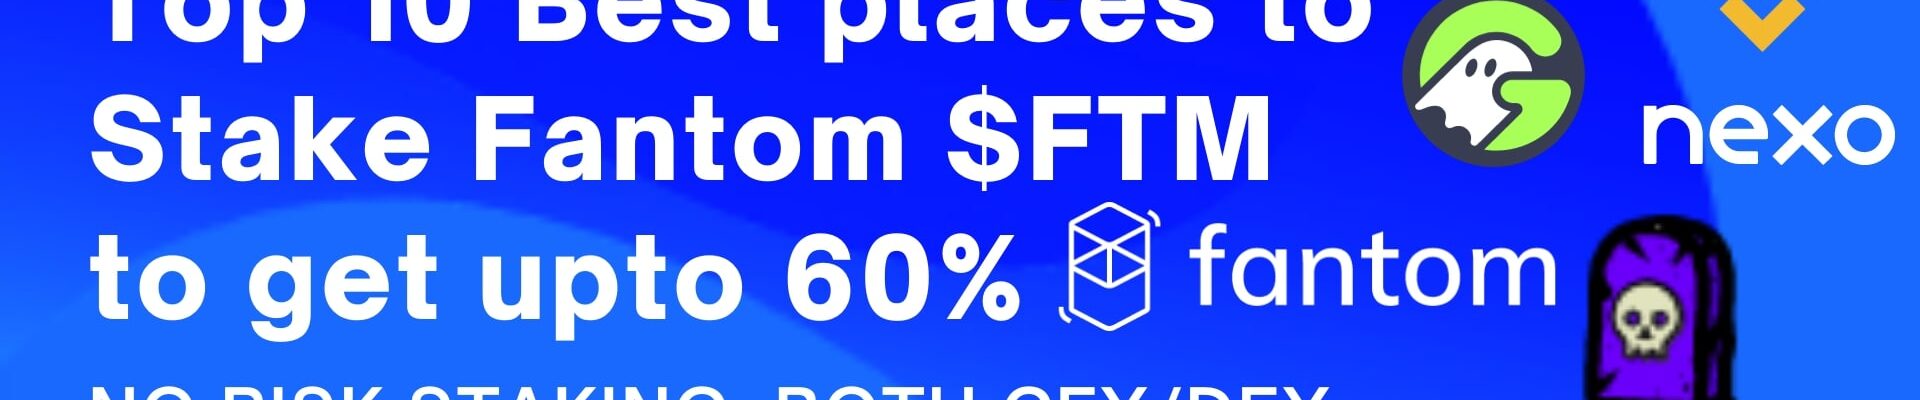 Best place to stake Fantom FTM token and get highest interest